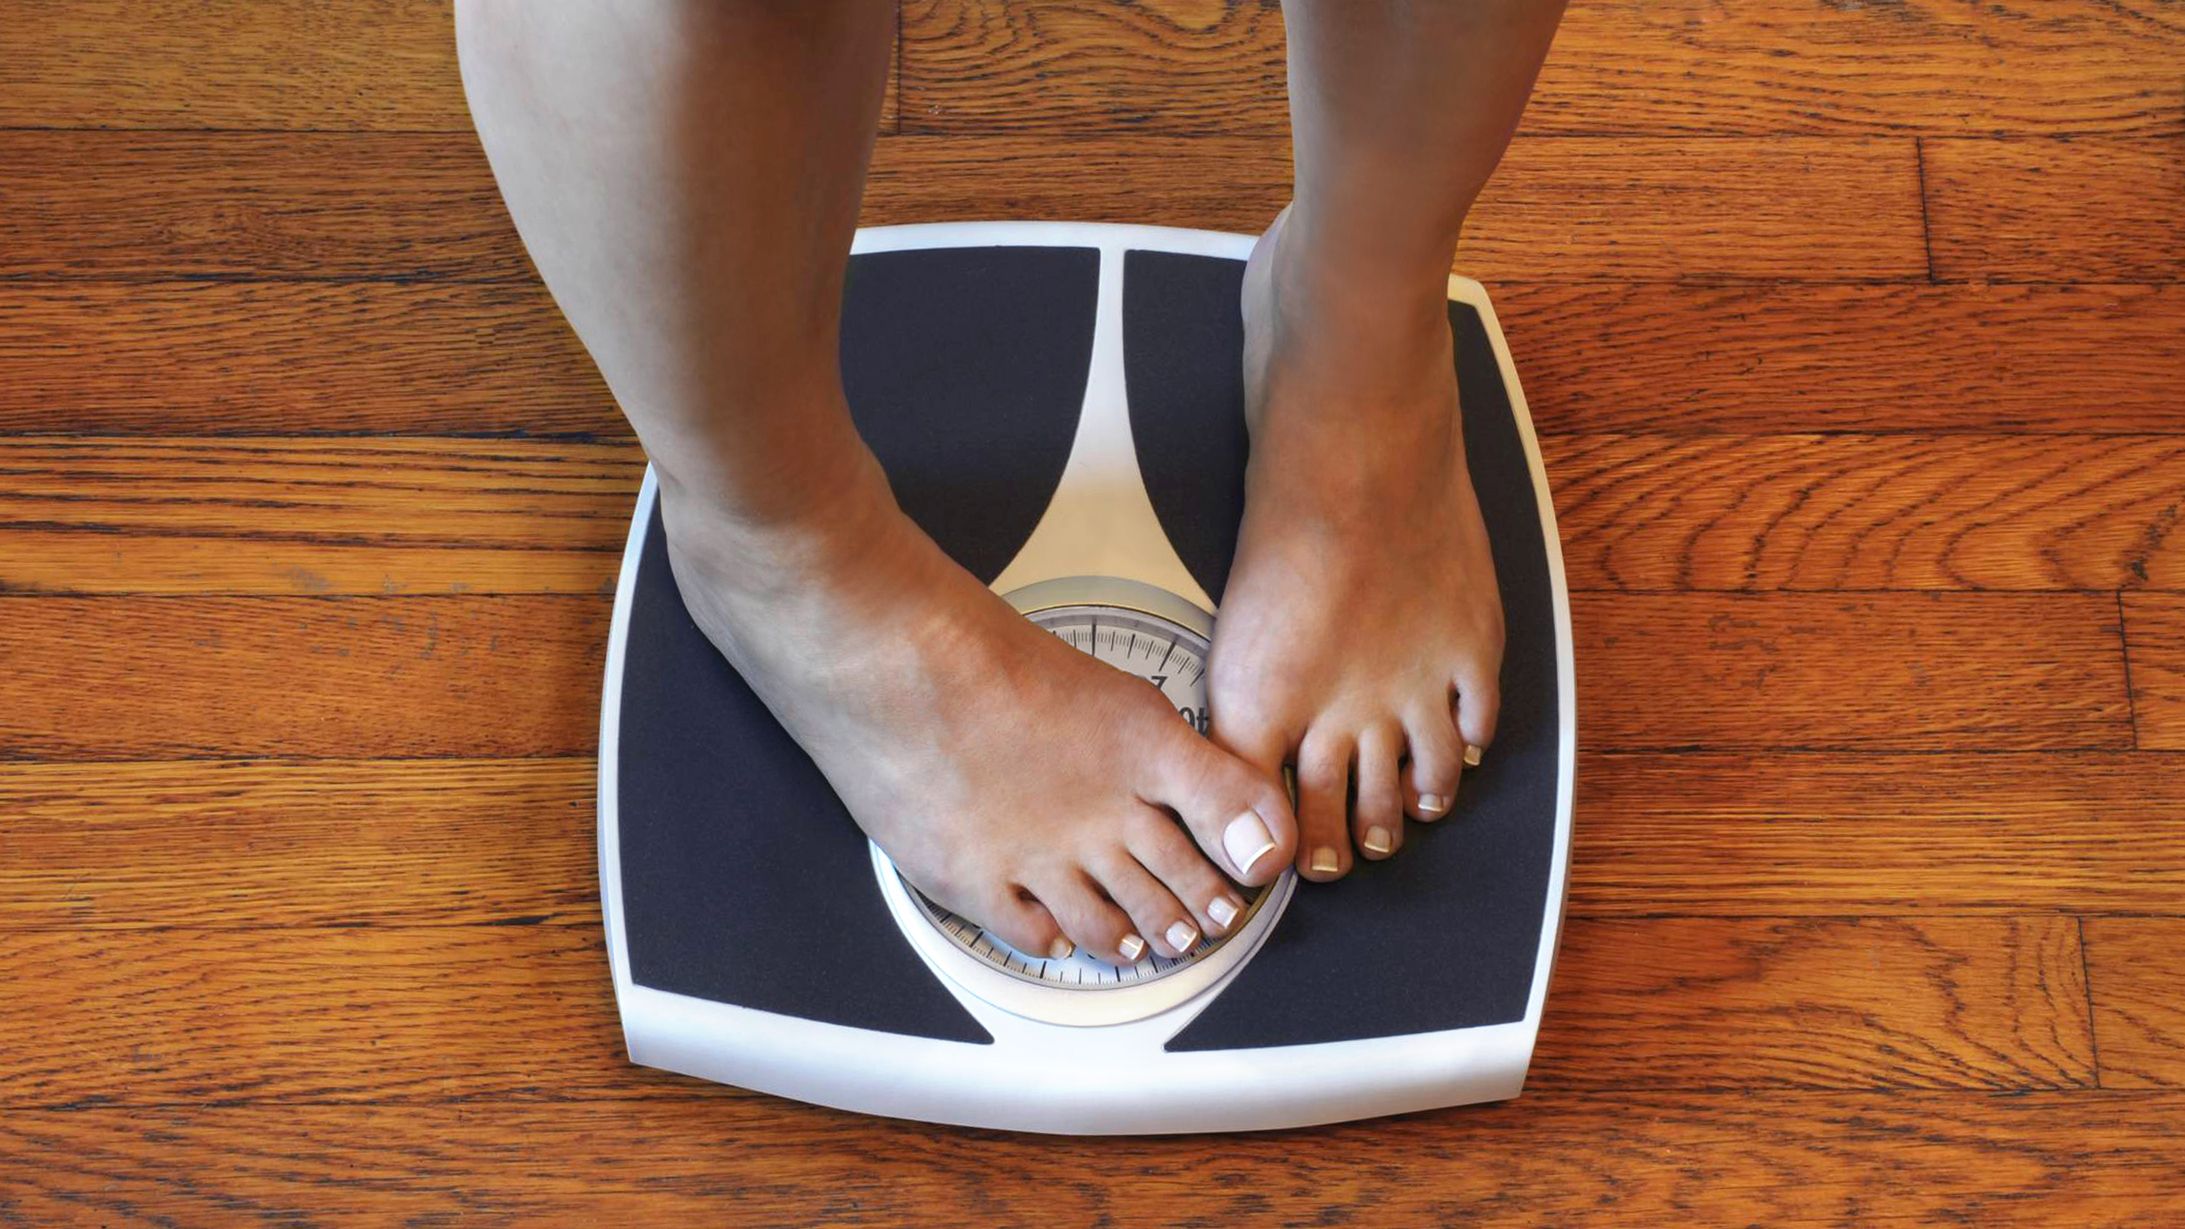 Can Food Scales Help You Lose Weight?